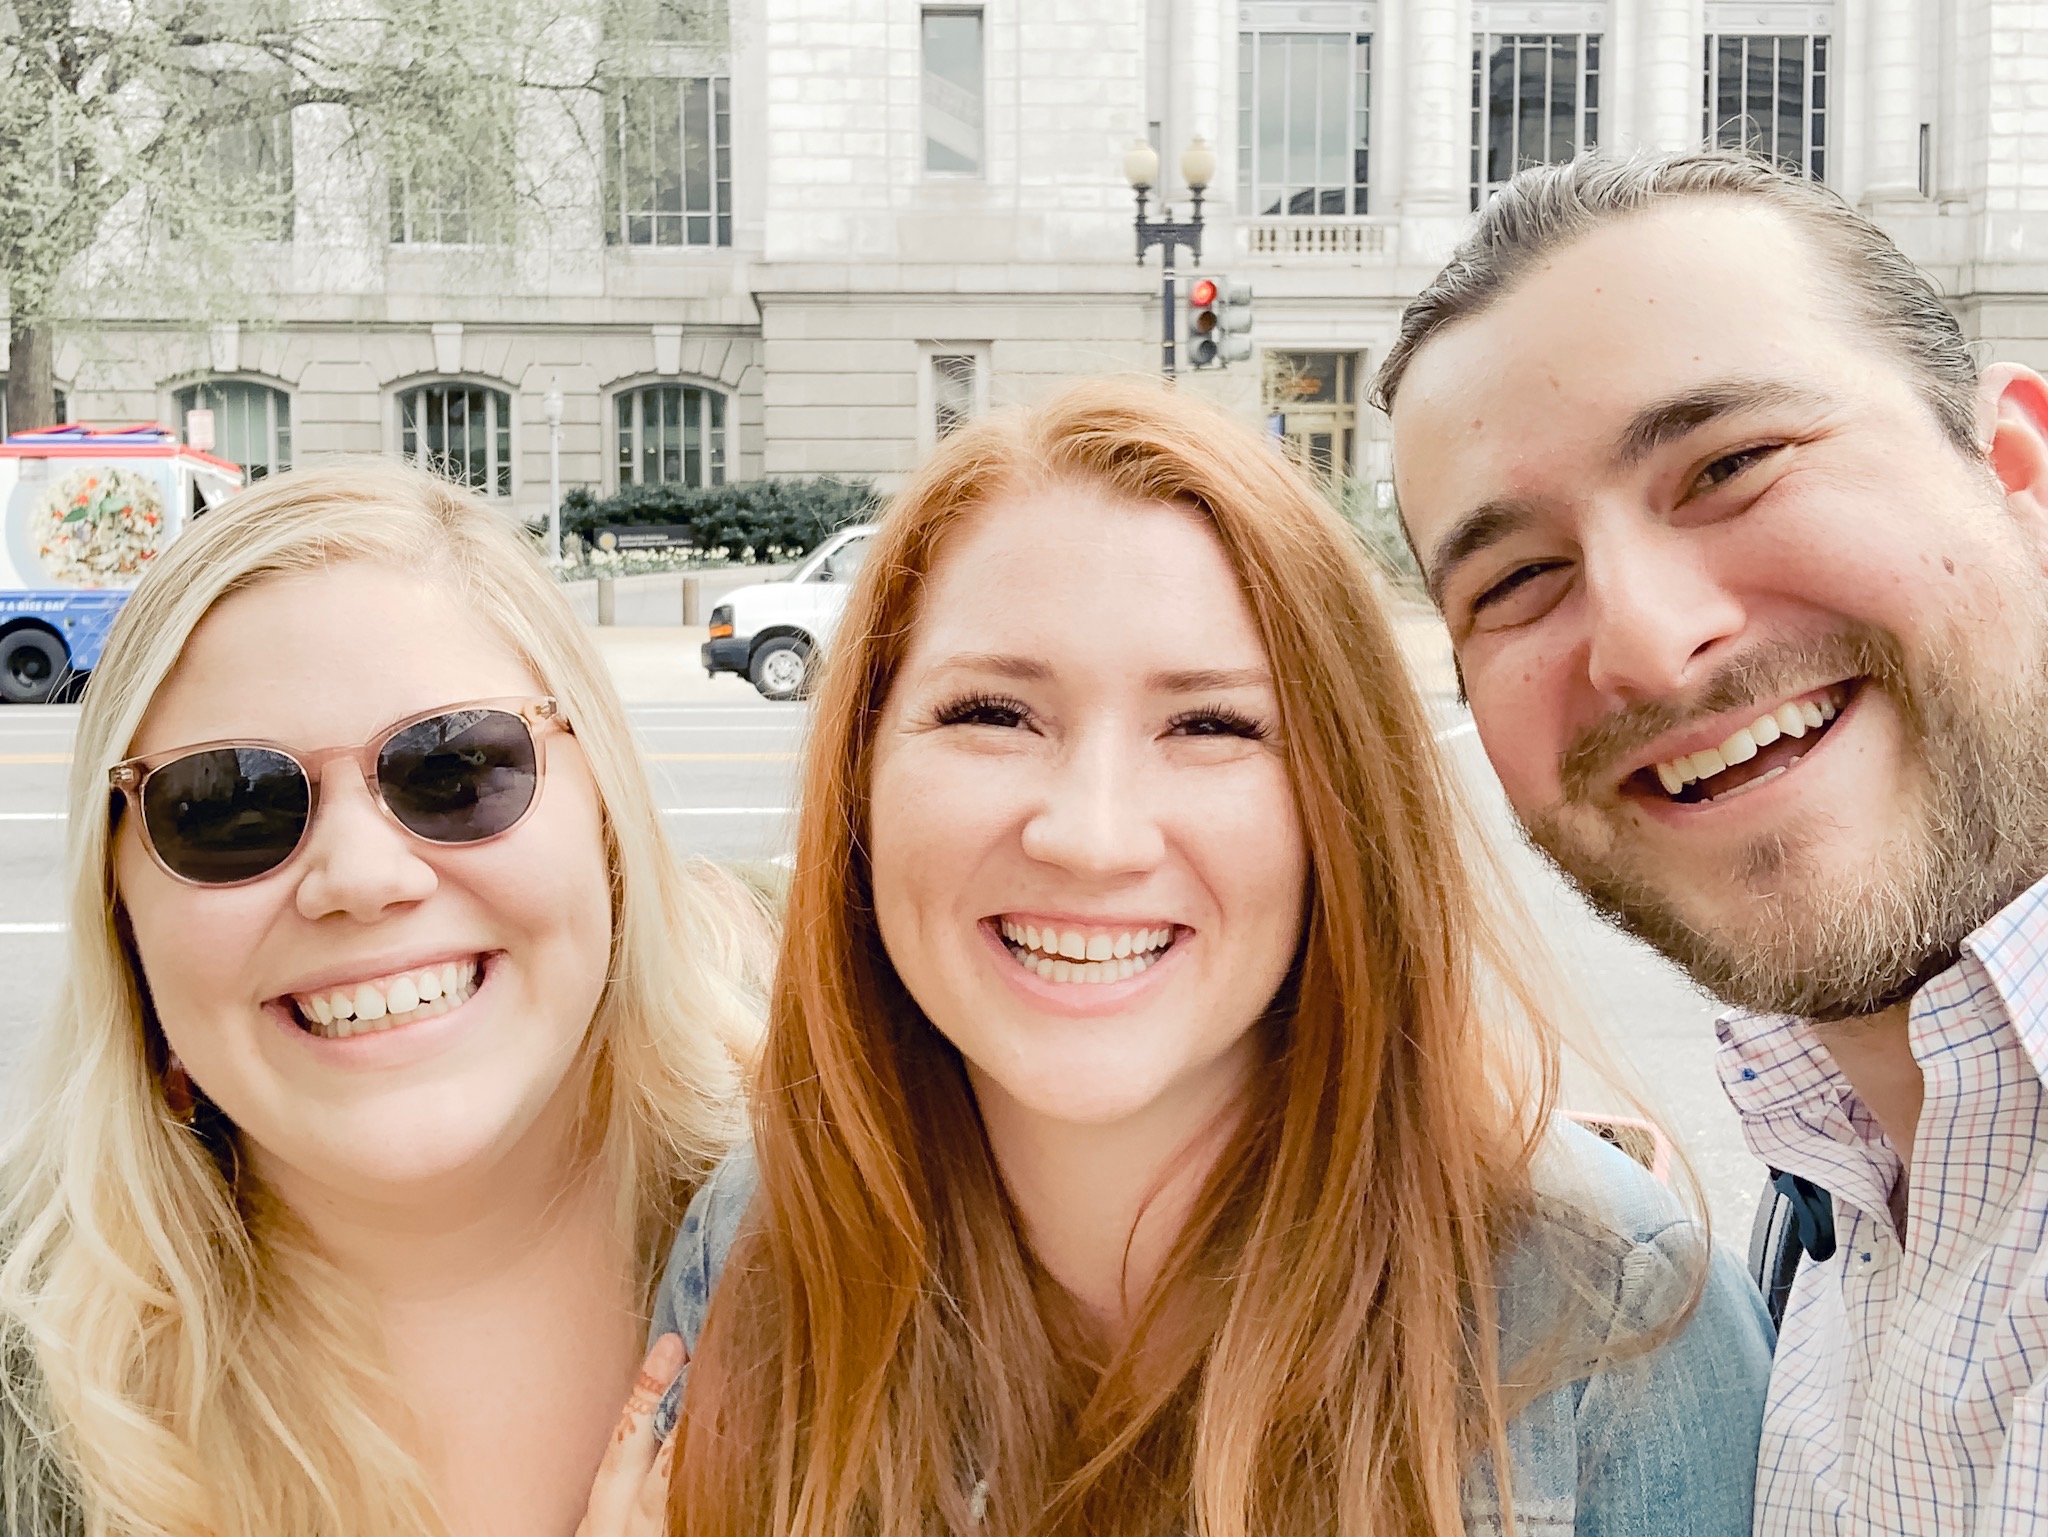 Last week AJ and I got to embark on a trip of firsts! Our first time heading to D.C. Our first time traveling with our bff Paige. (Aside from a quick beach road trip last summer!) And our first big ~wedding~ related shenanigan: having our engagement session!